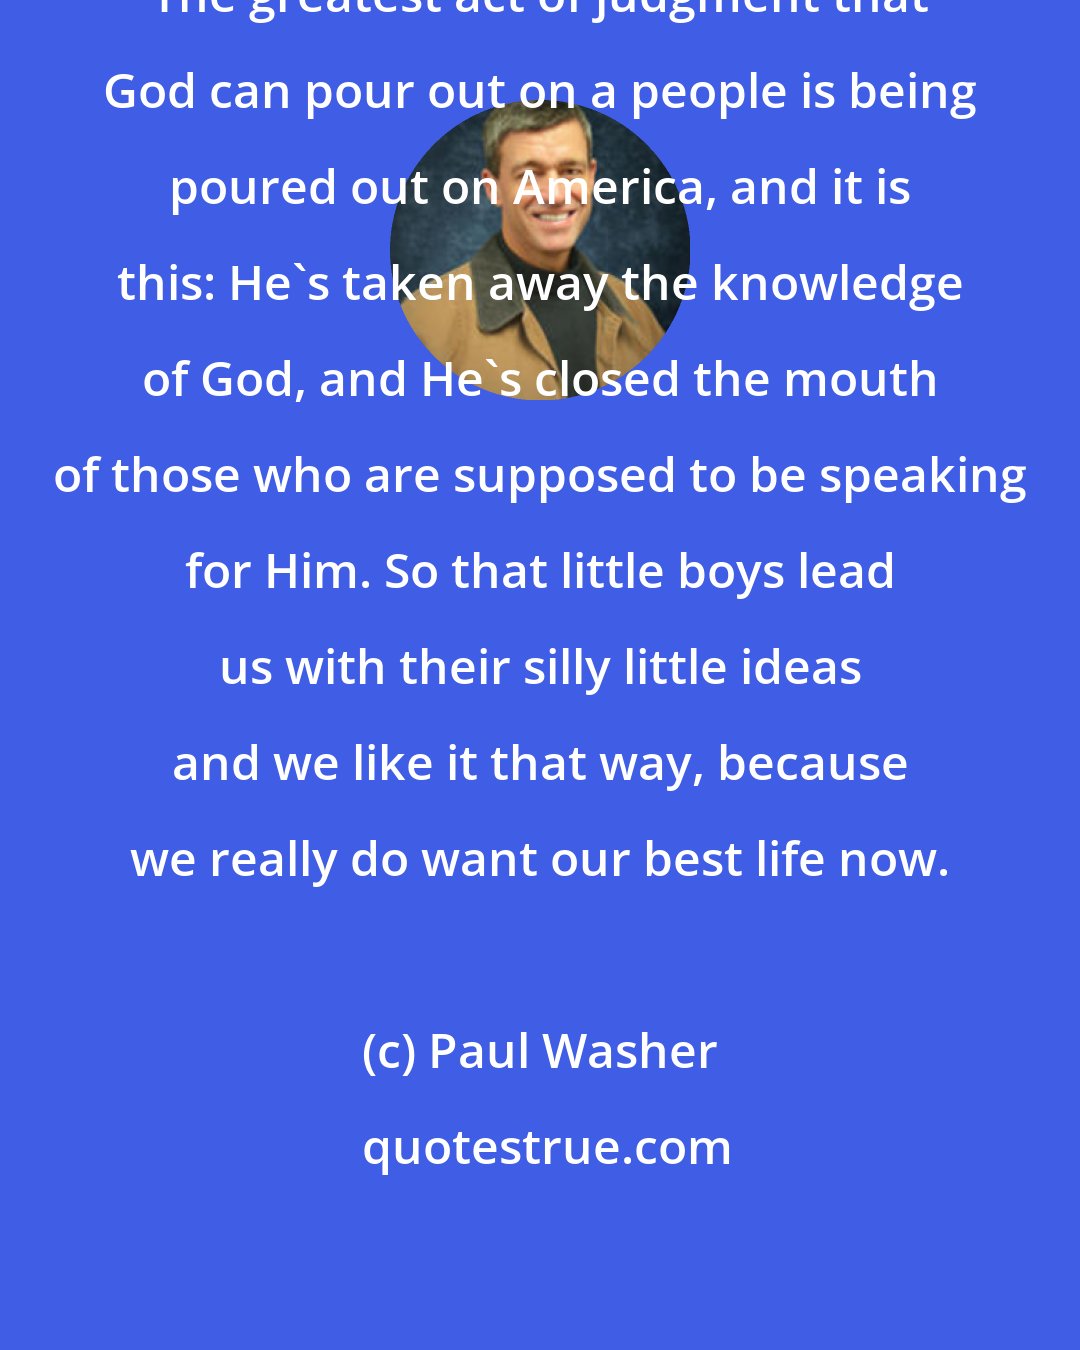 Paul Washer: The greatest act of judgment that God can pour out on a people is being poured out on America, and it is this: He's taken away the knowledge of God, and He's closed the mouth of those who are supposed to be speaking for Him. So that little boys lead us with their silly little ideas and we like it that way, because we really do want our best life now.